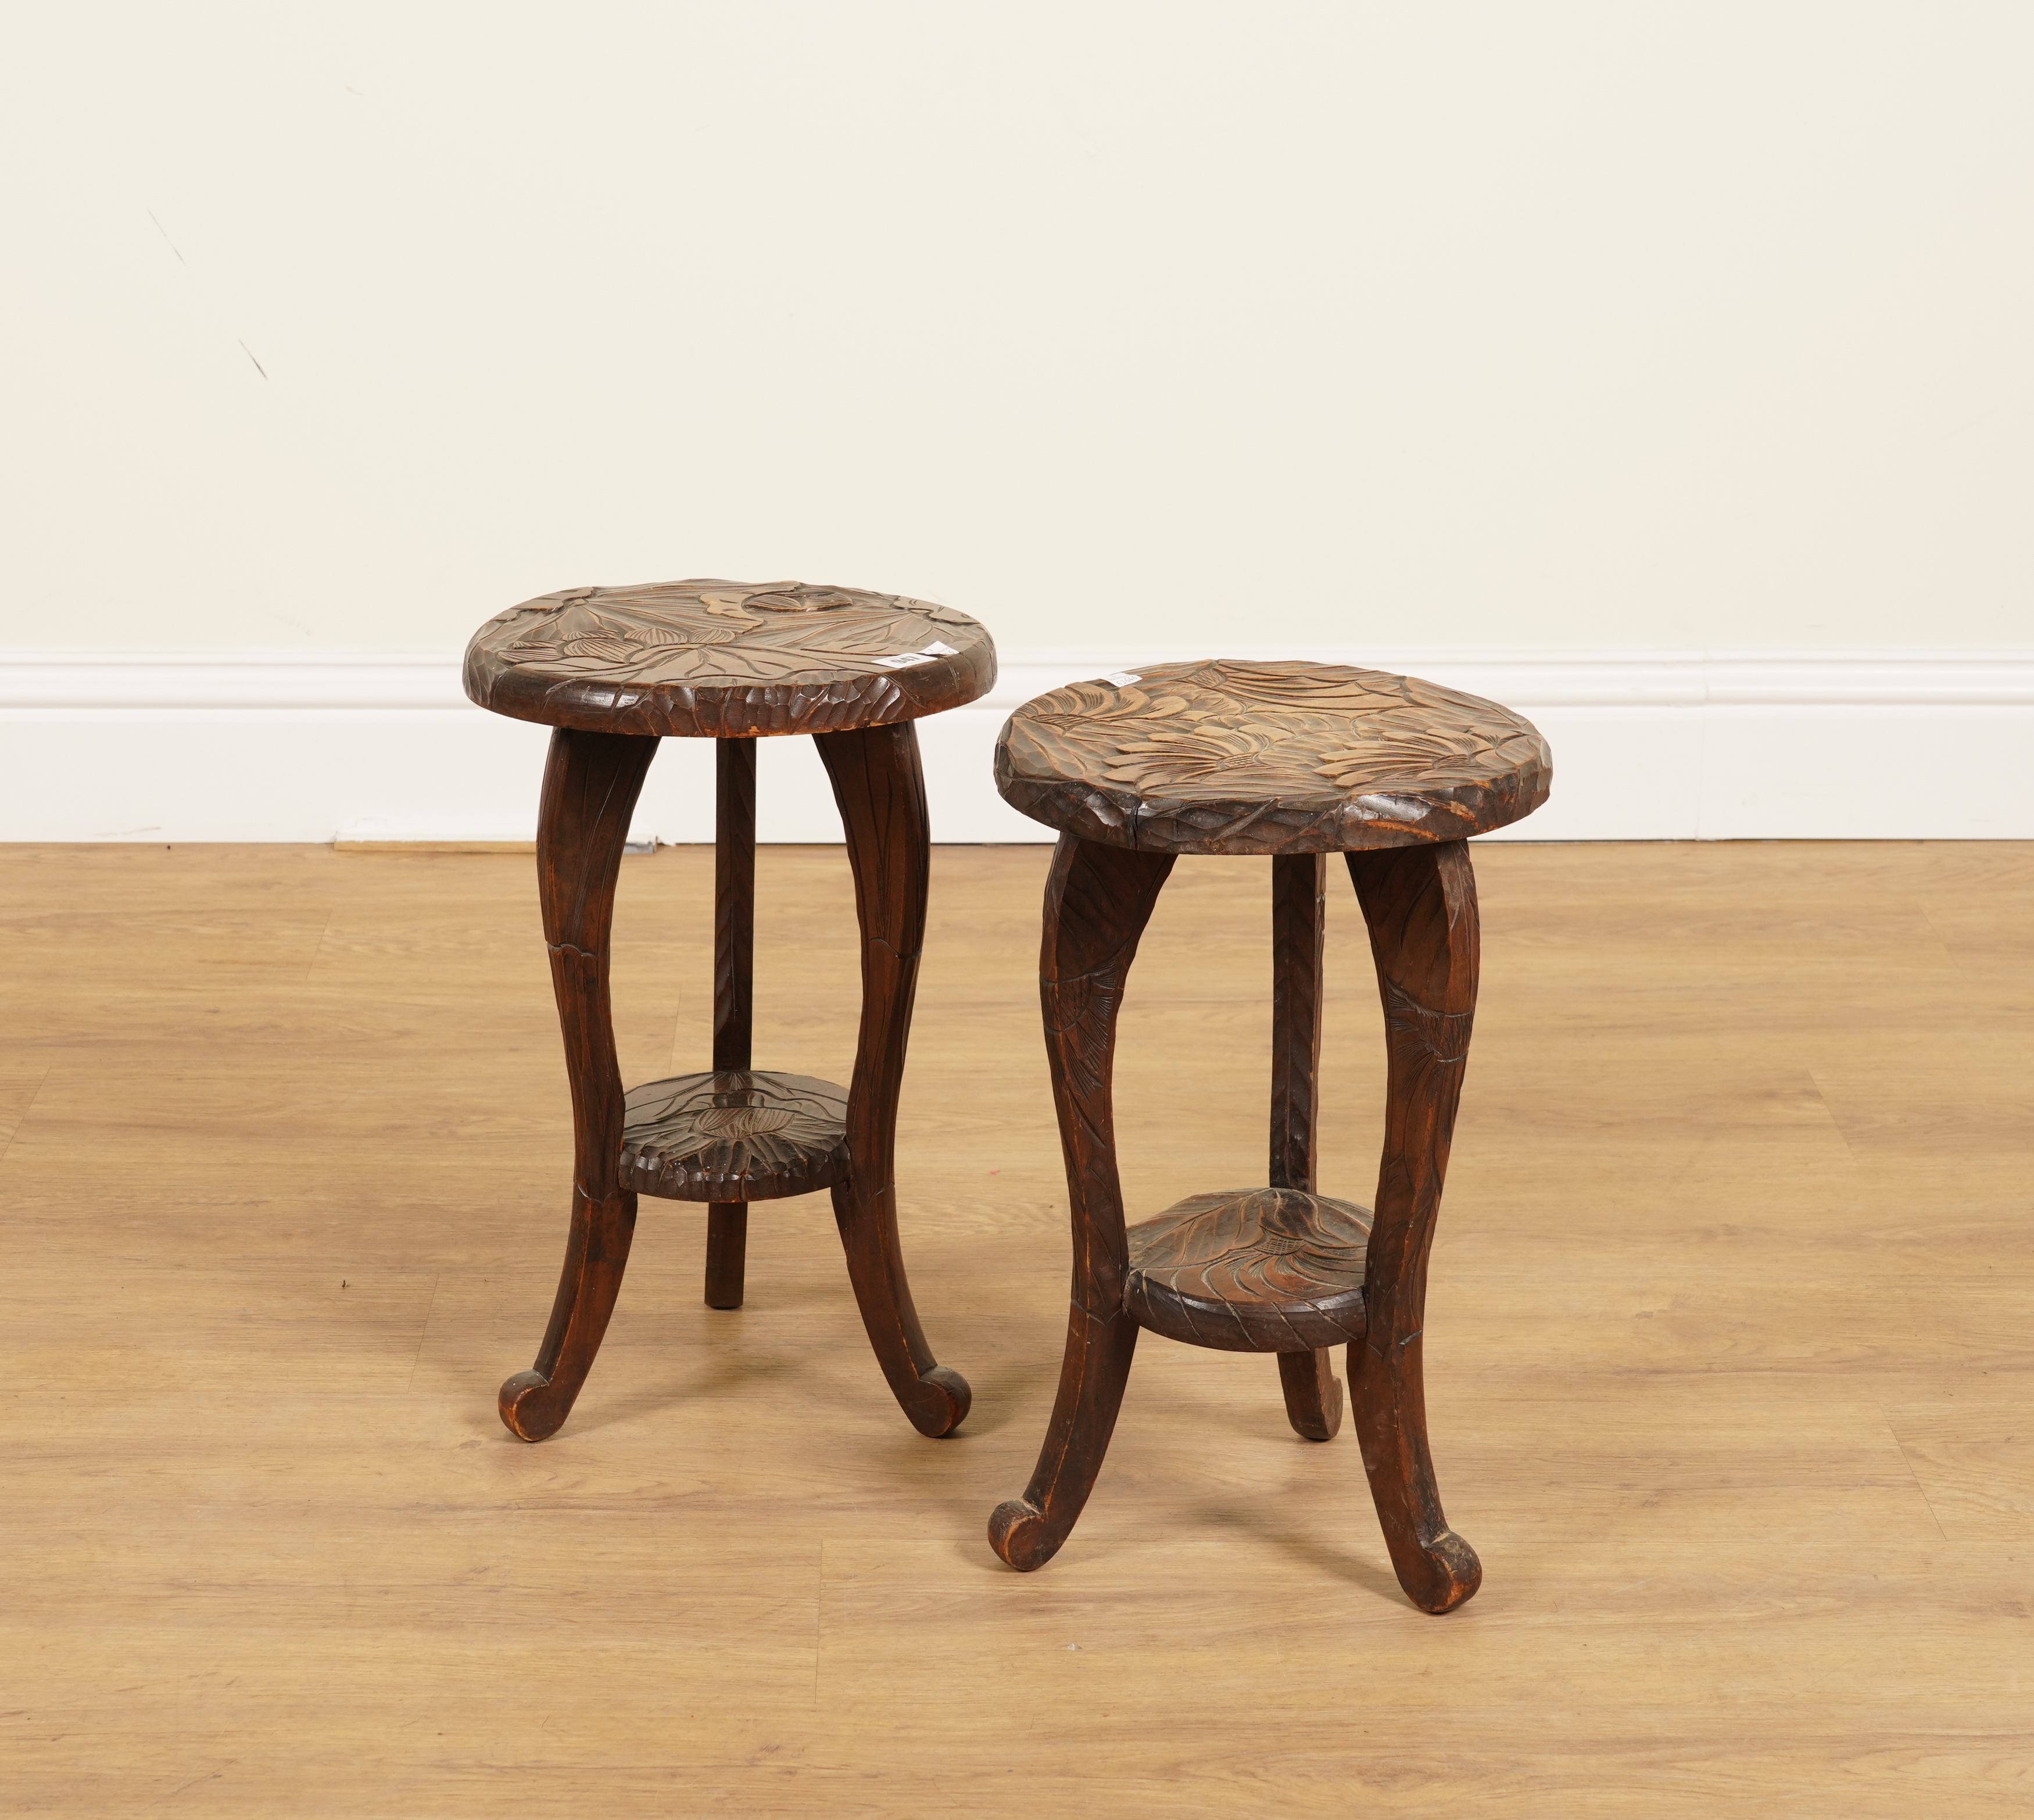 LIBERTY & CO; A PAIR OF FLORAL CARVED CIRCULAR SIDE TABLES (2)